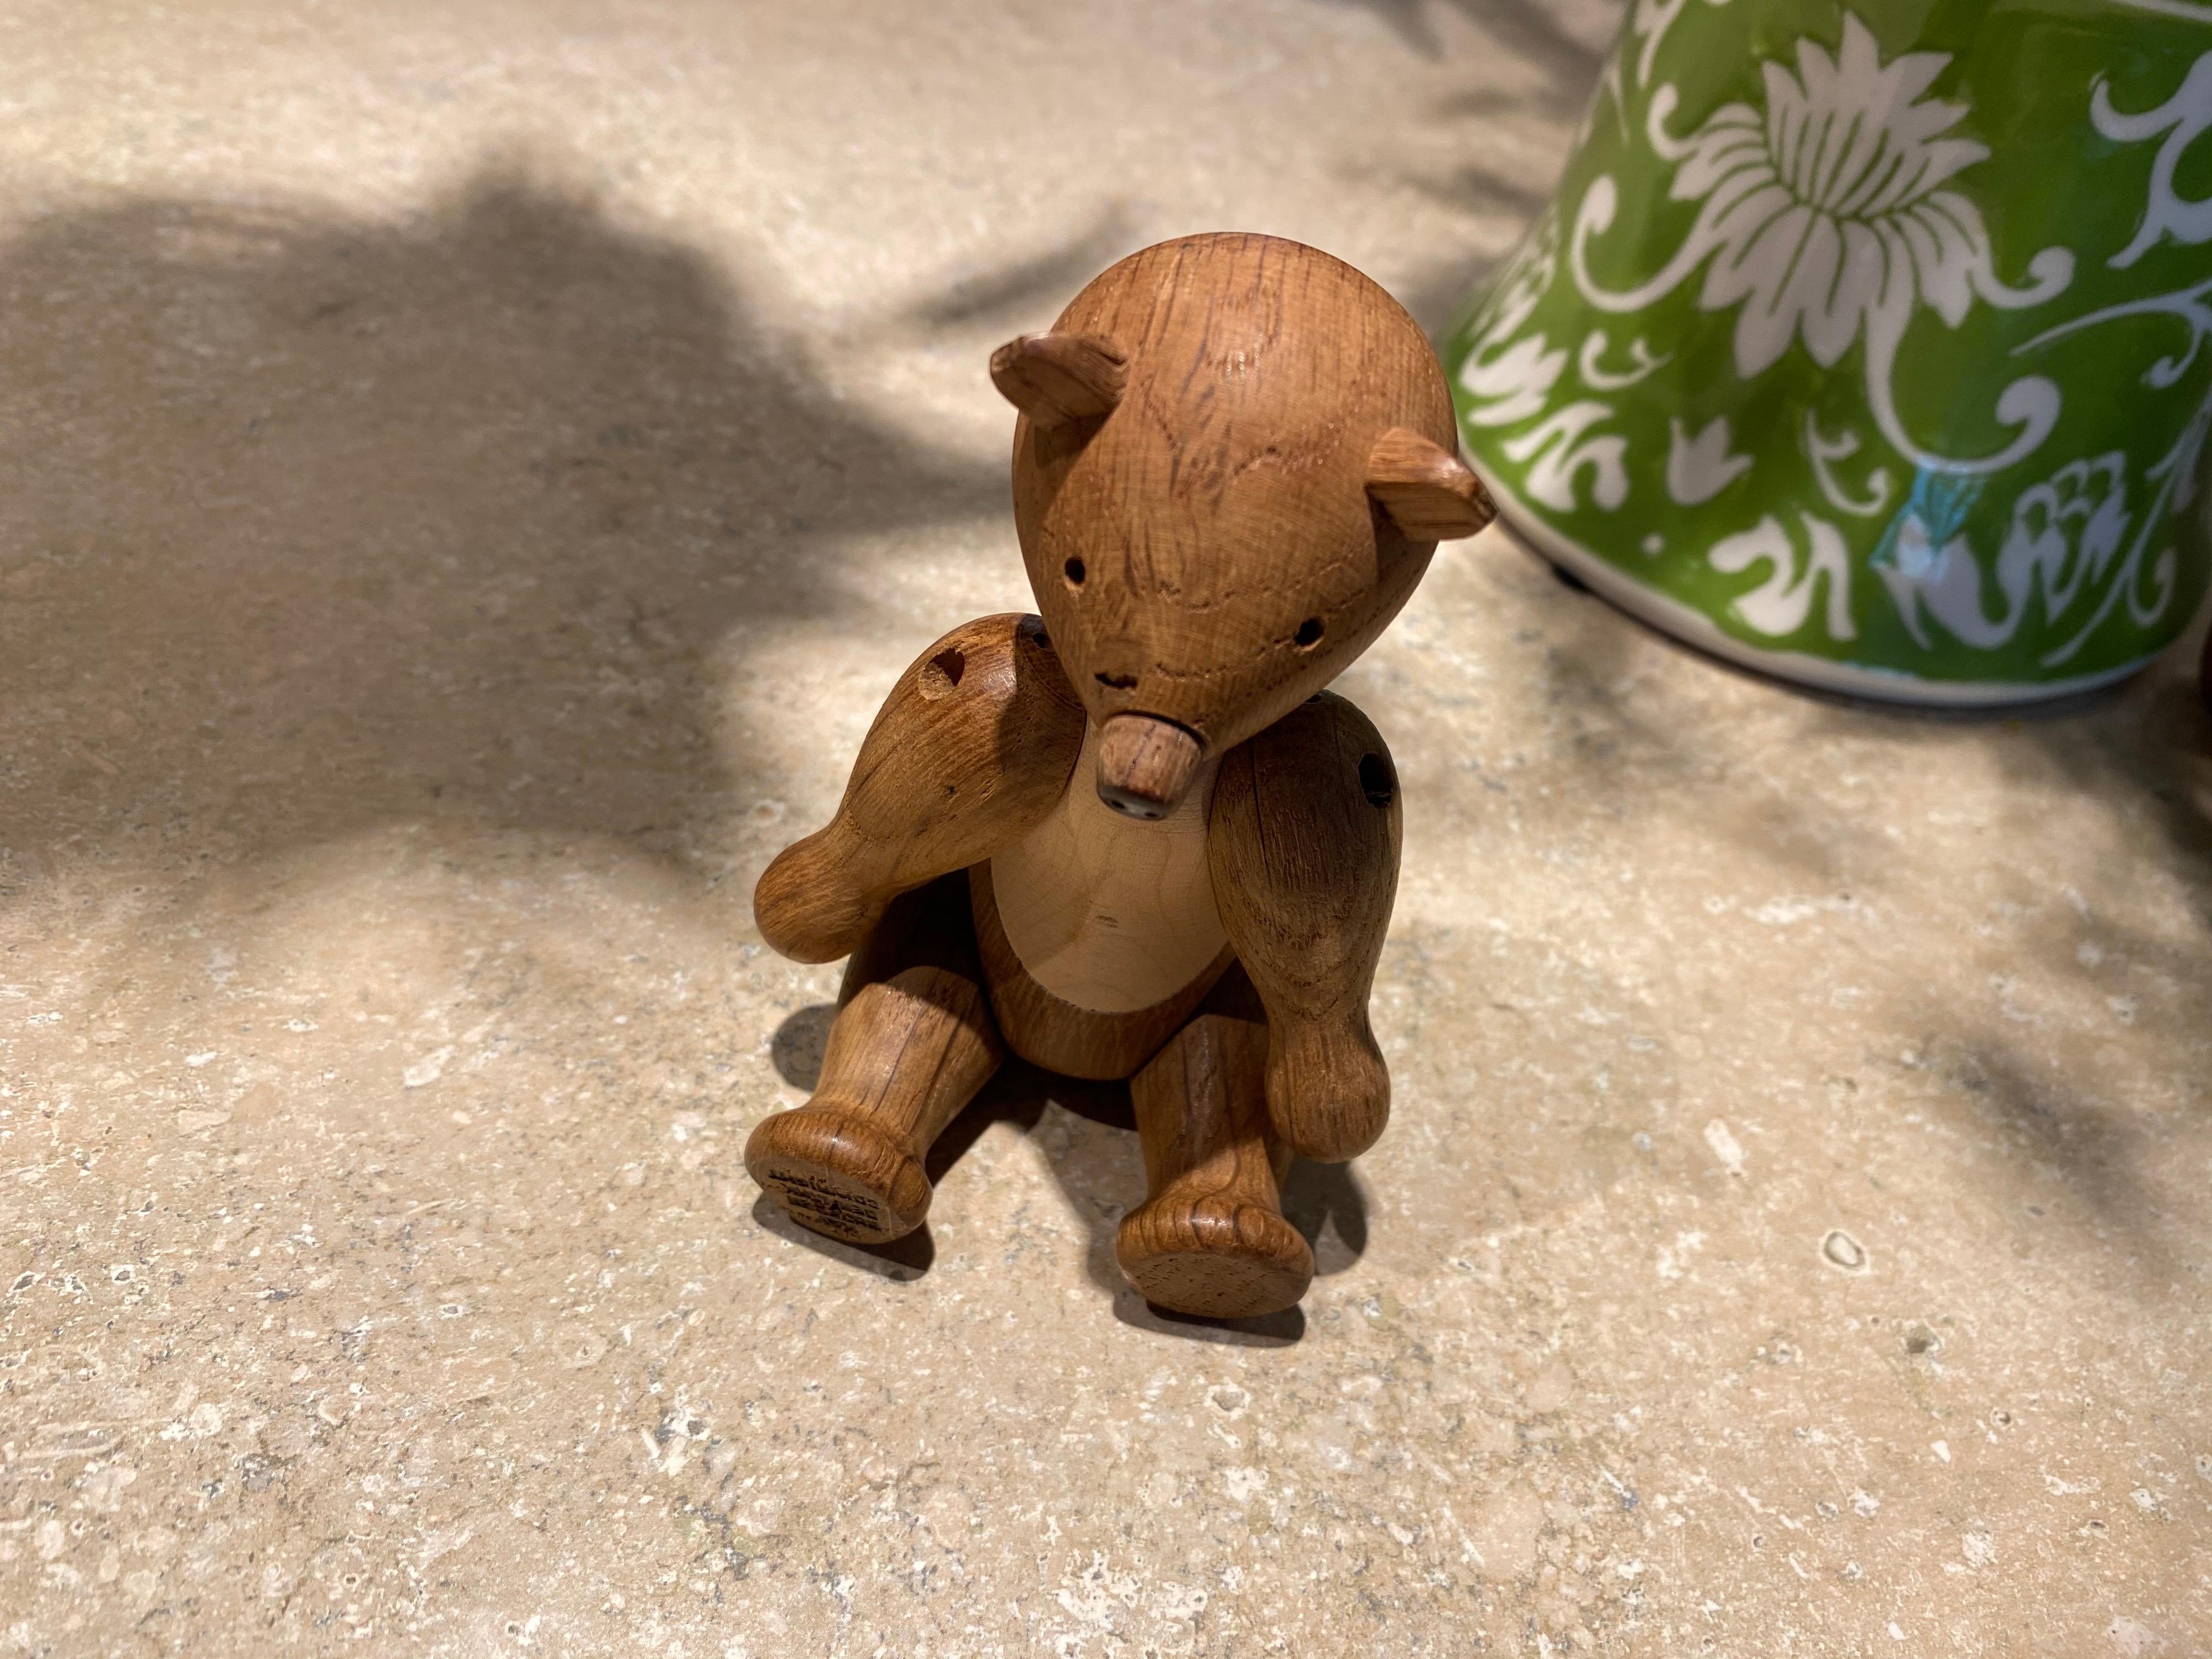 Mid-century wooden articulated teddy bear made of oak designed by Kay Bojesen and in great condition.